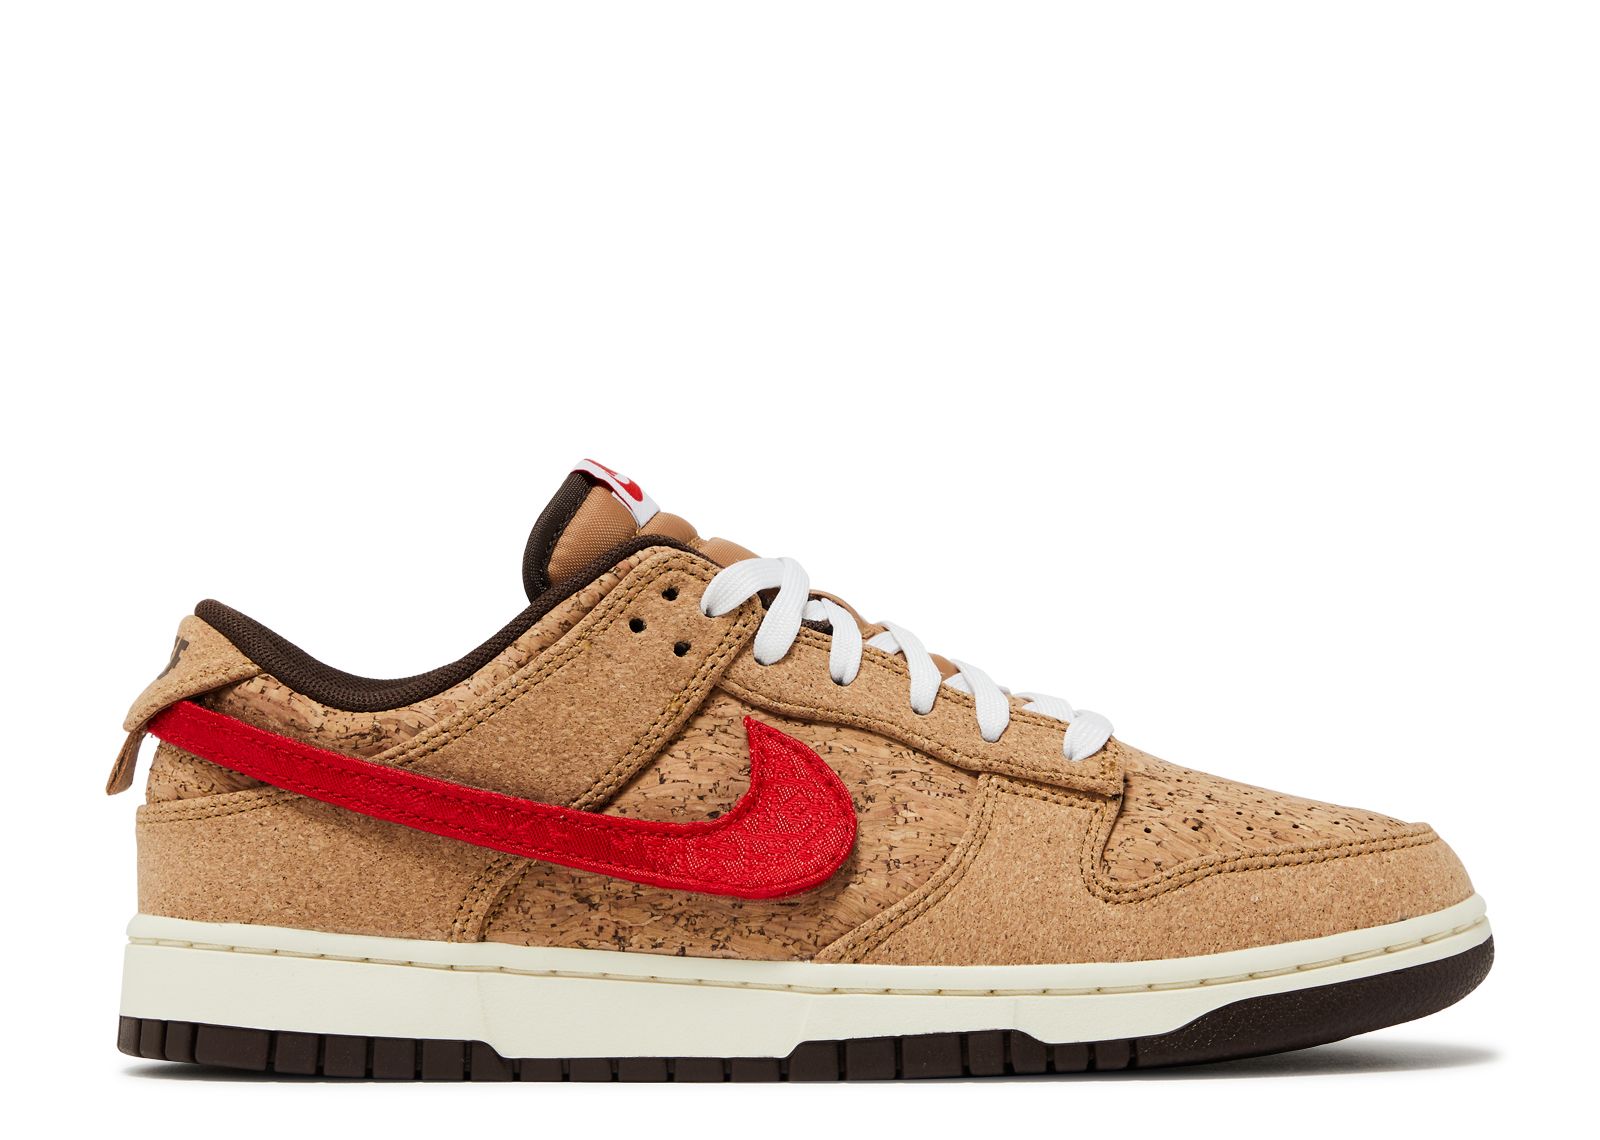 Кроссовки Nike Clot X Dunk Low Sp 'Cork', коричневый 10 gram water solube gibberellic acid 20% sp gibberellin 20% sp water solube ga3 20% sp with low price and free shipping